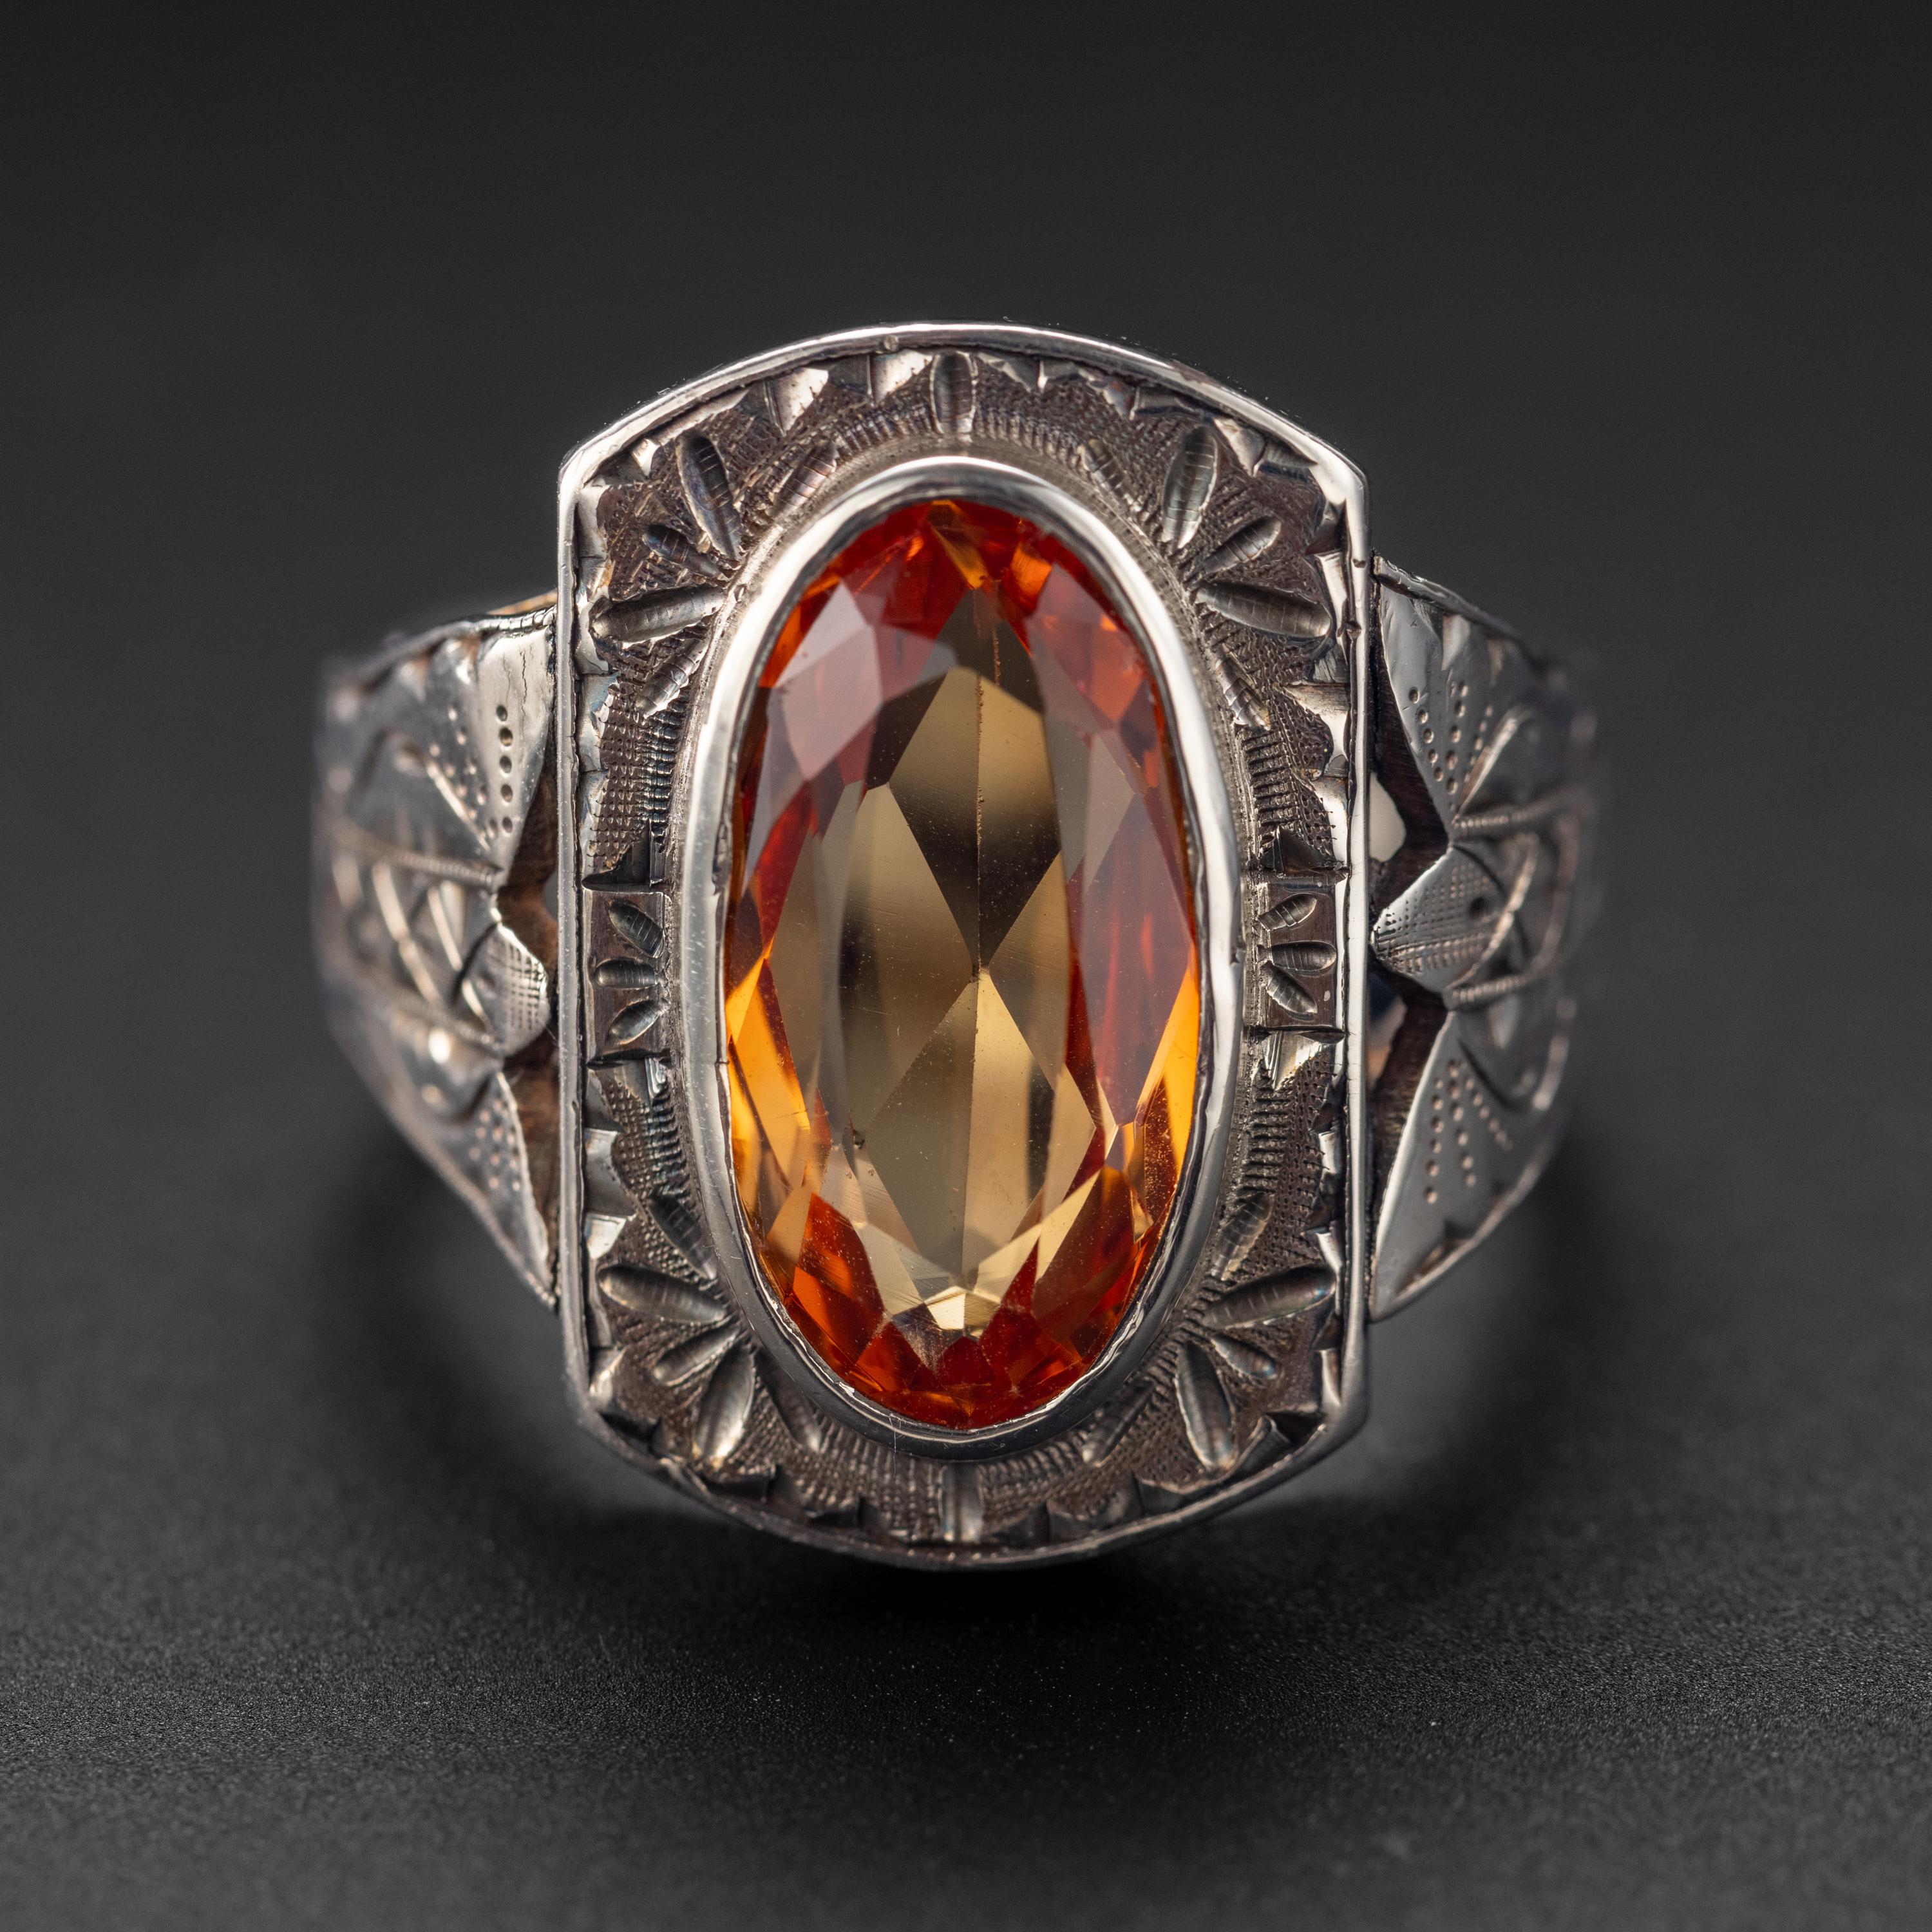 This bold and handsome hand-made ring from the 1930s features an 18.50mm x 10.13mm oval-cut orange sapphire weighing 7.62 carats set into a deeply engraved heavy silver mounting. The sapphire was created by the flame fusion process, invented in the